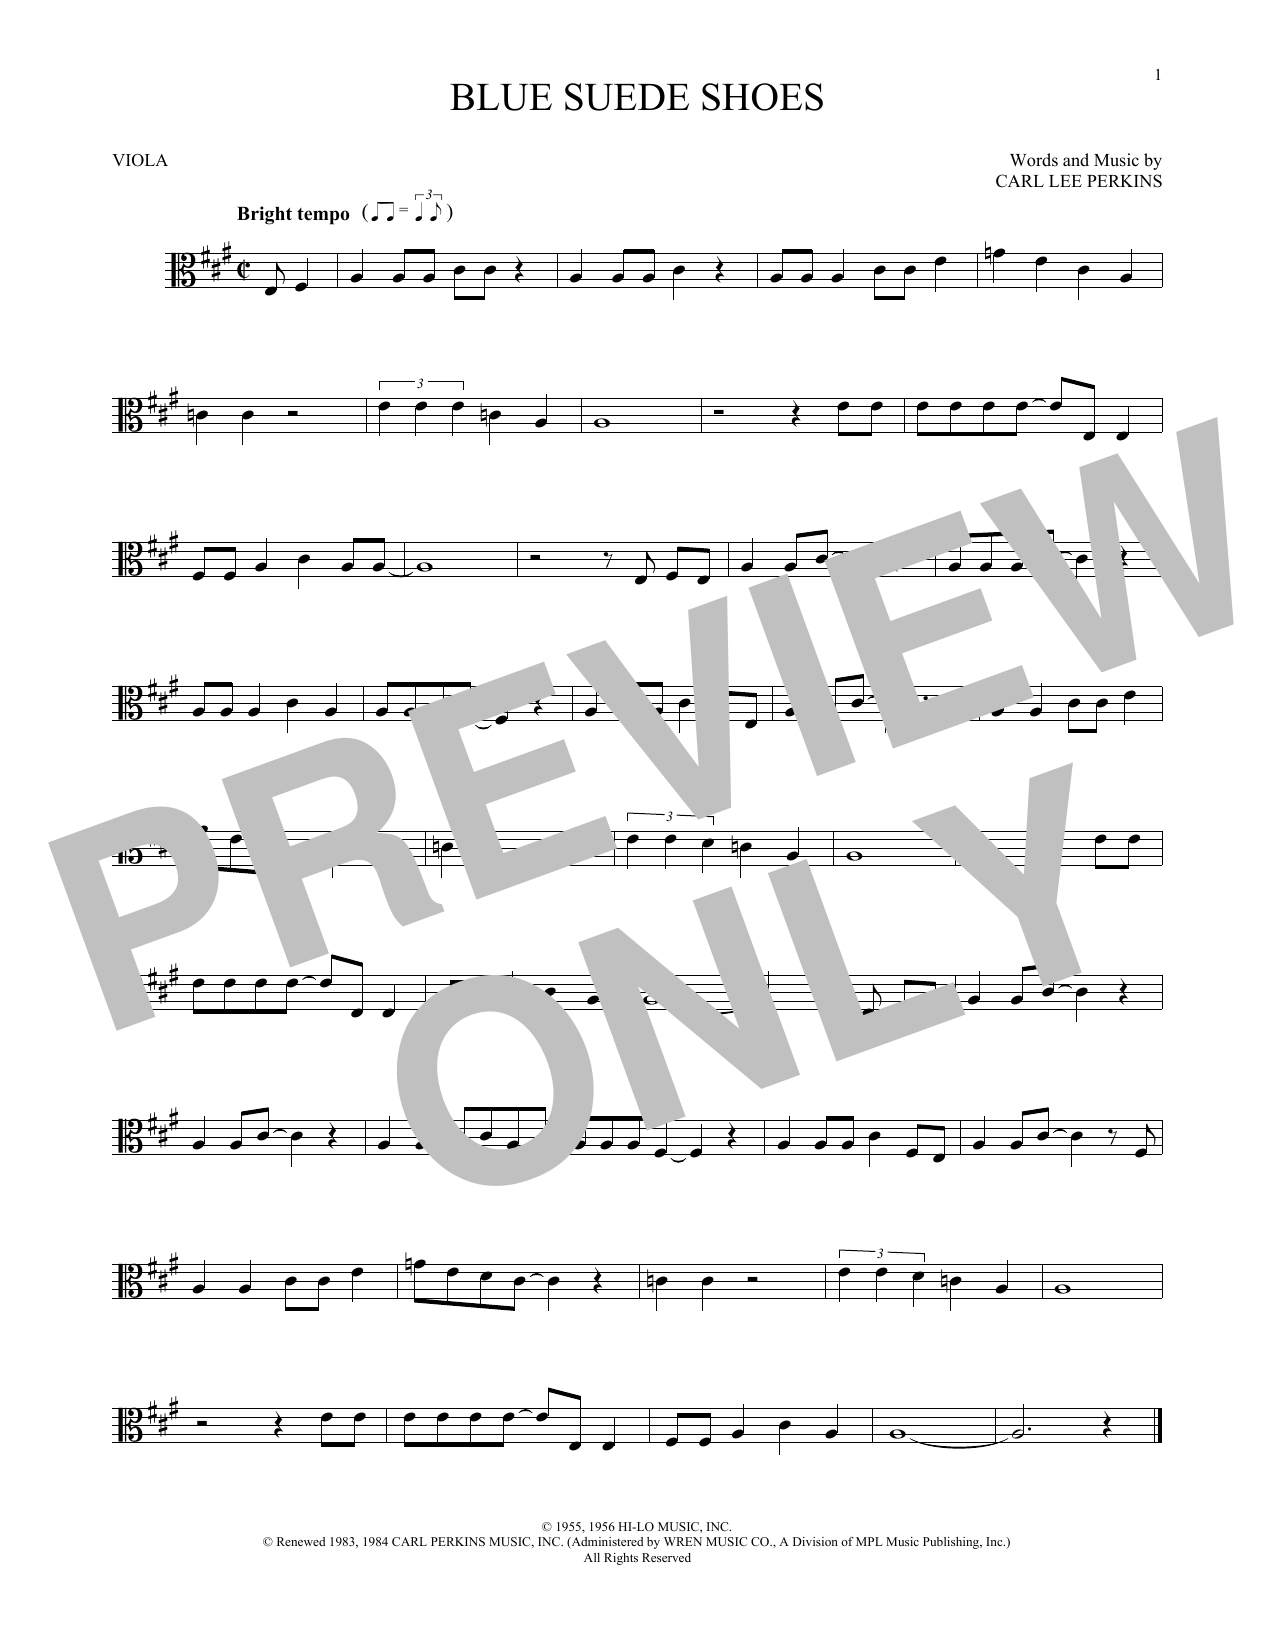 Download Carl Perkins Blue Suede Shoes Sheet Music